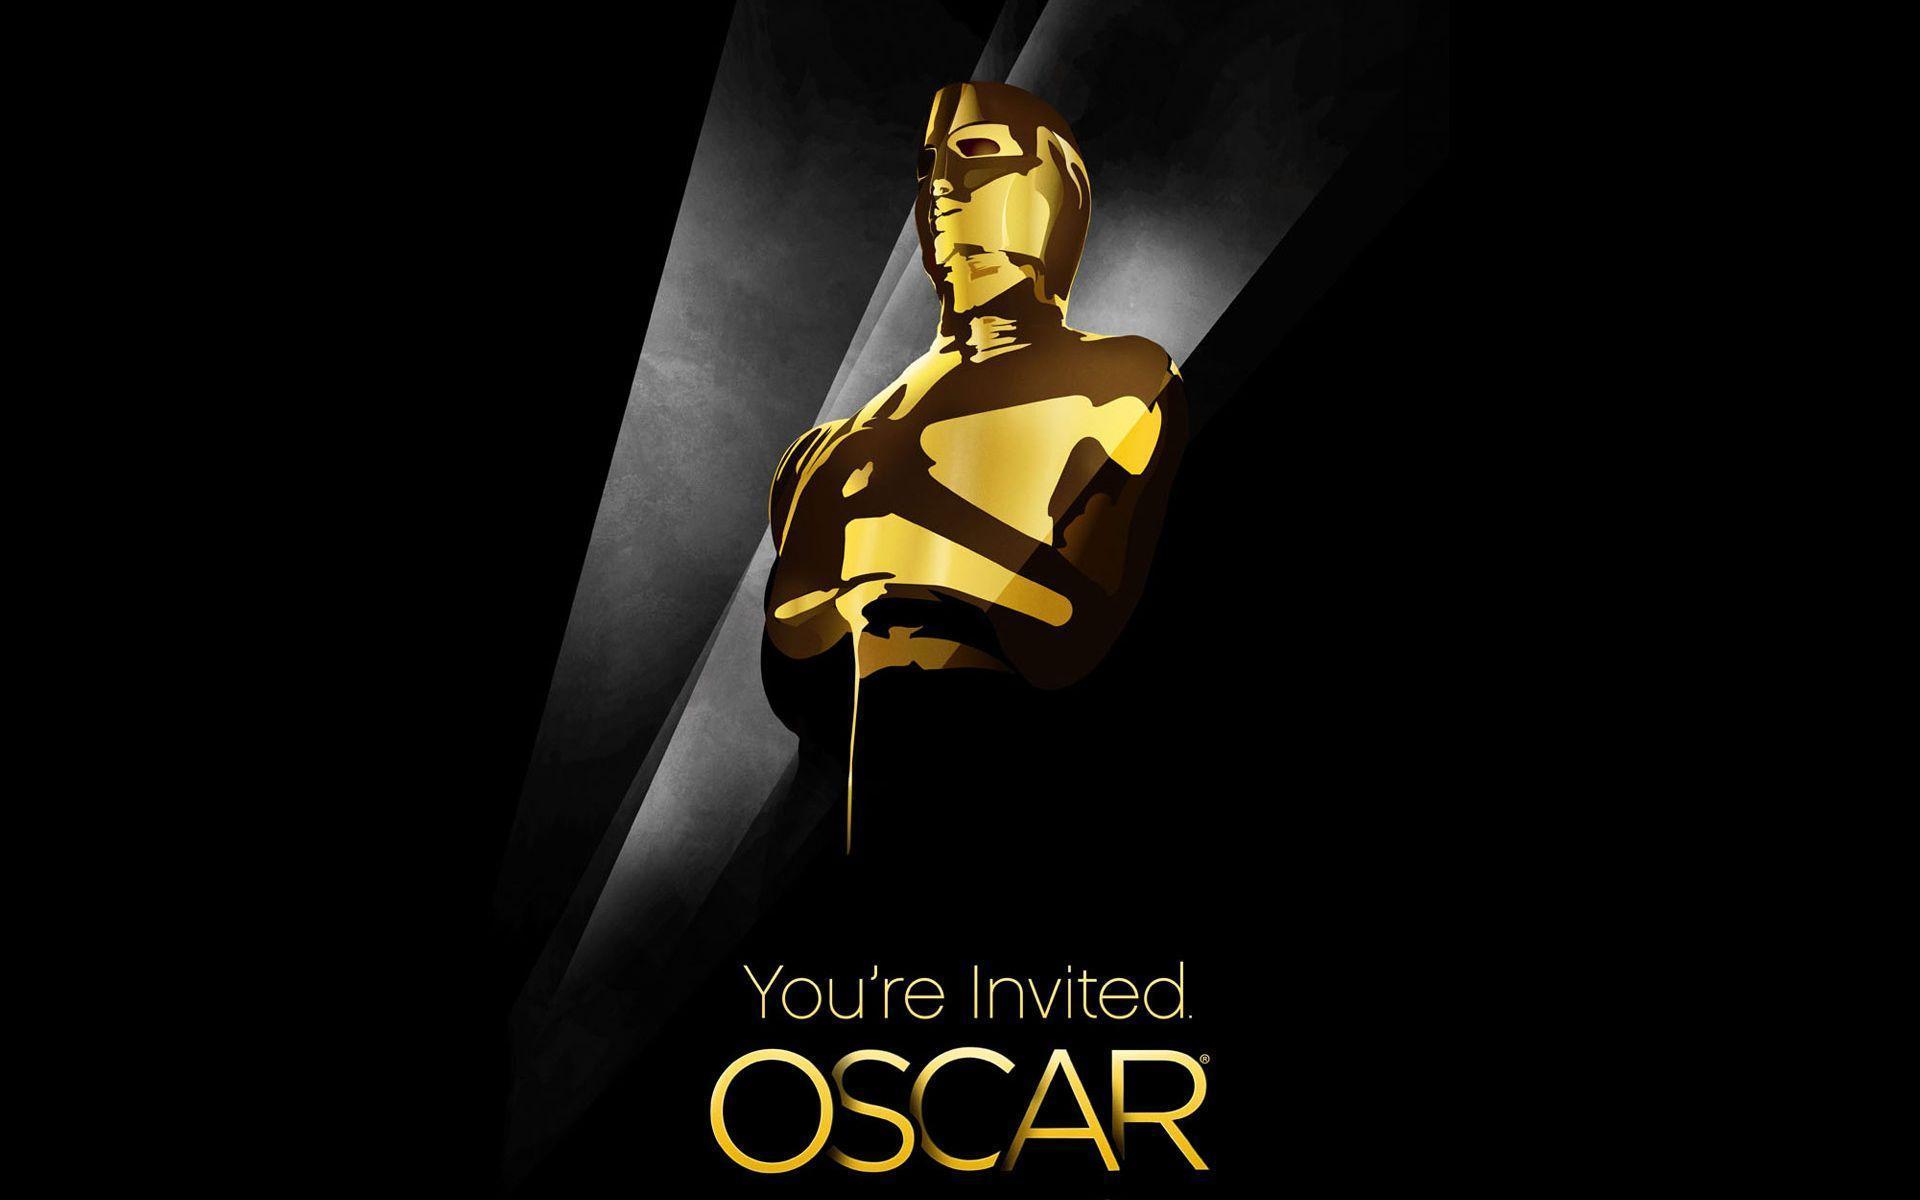 Oscars Wallpaper Wallpaper Background of Your Choice